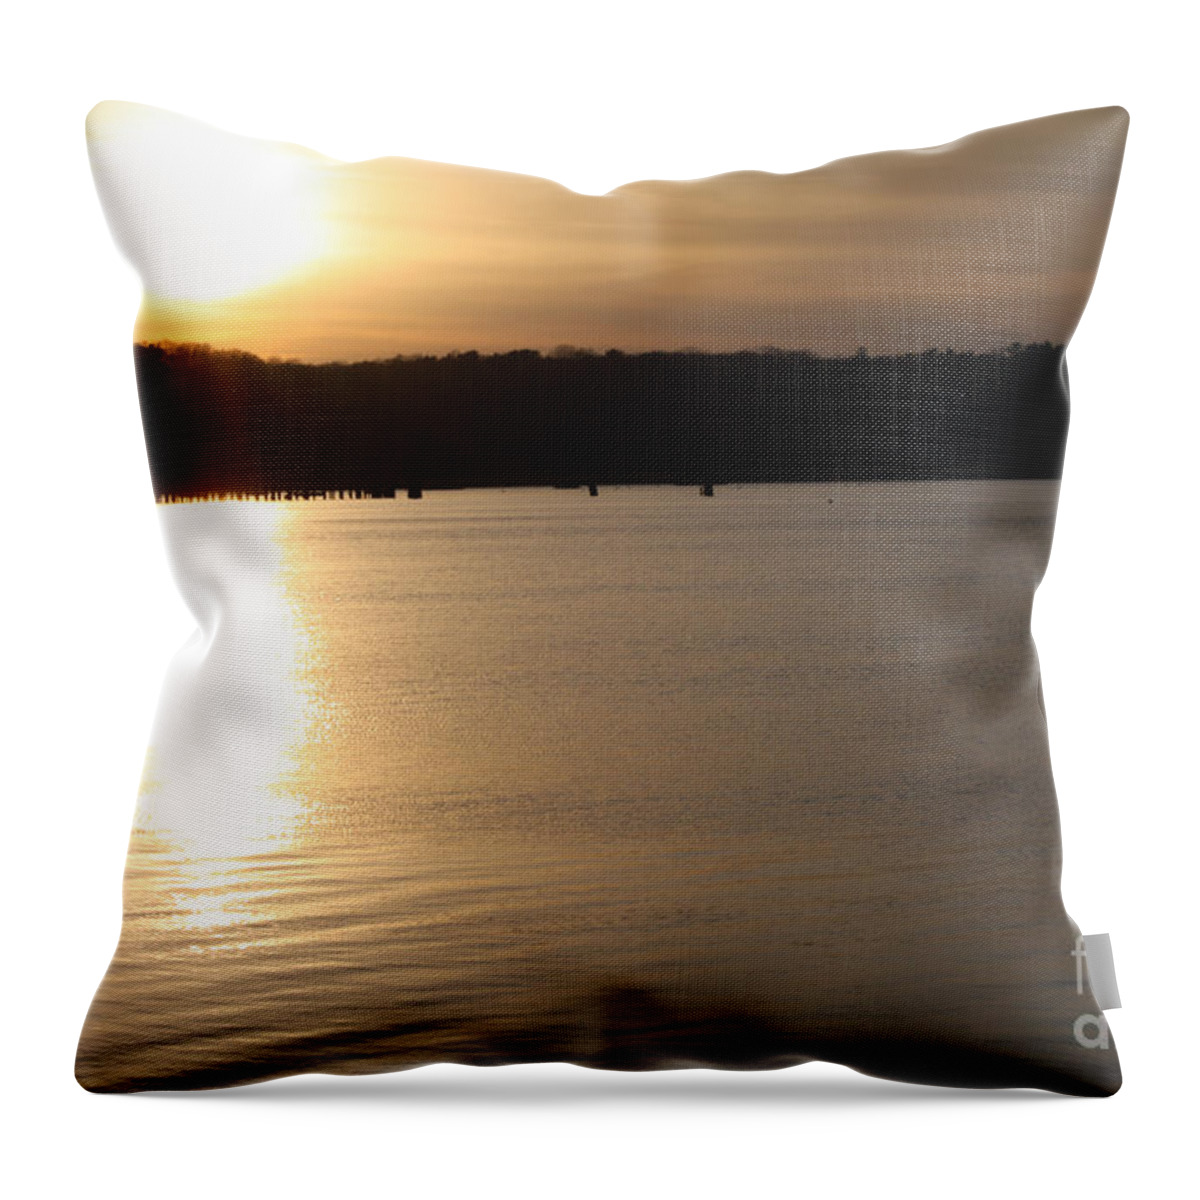 Oyster Bay Sunset Throw Pillow featuring the photograph Oyster Bay Sunset by John Telfer